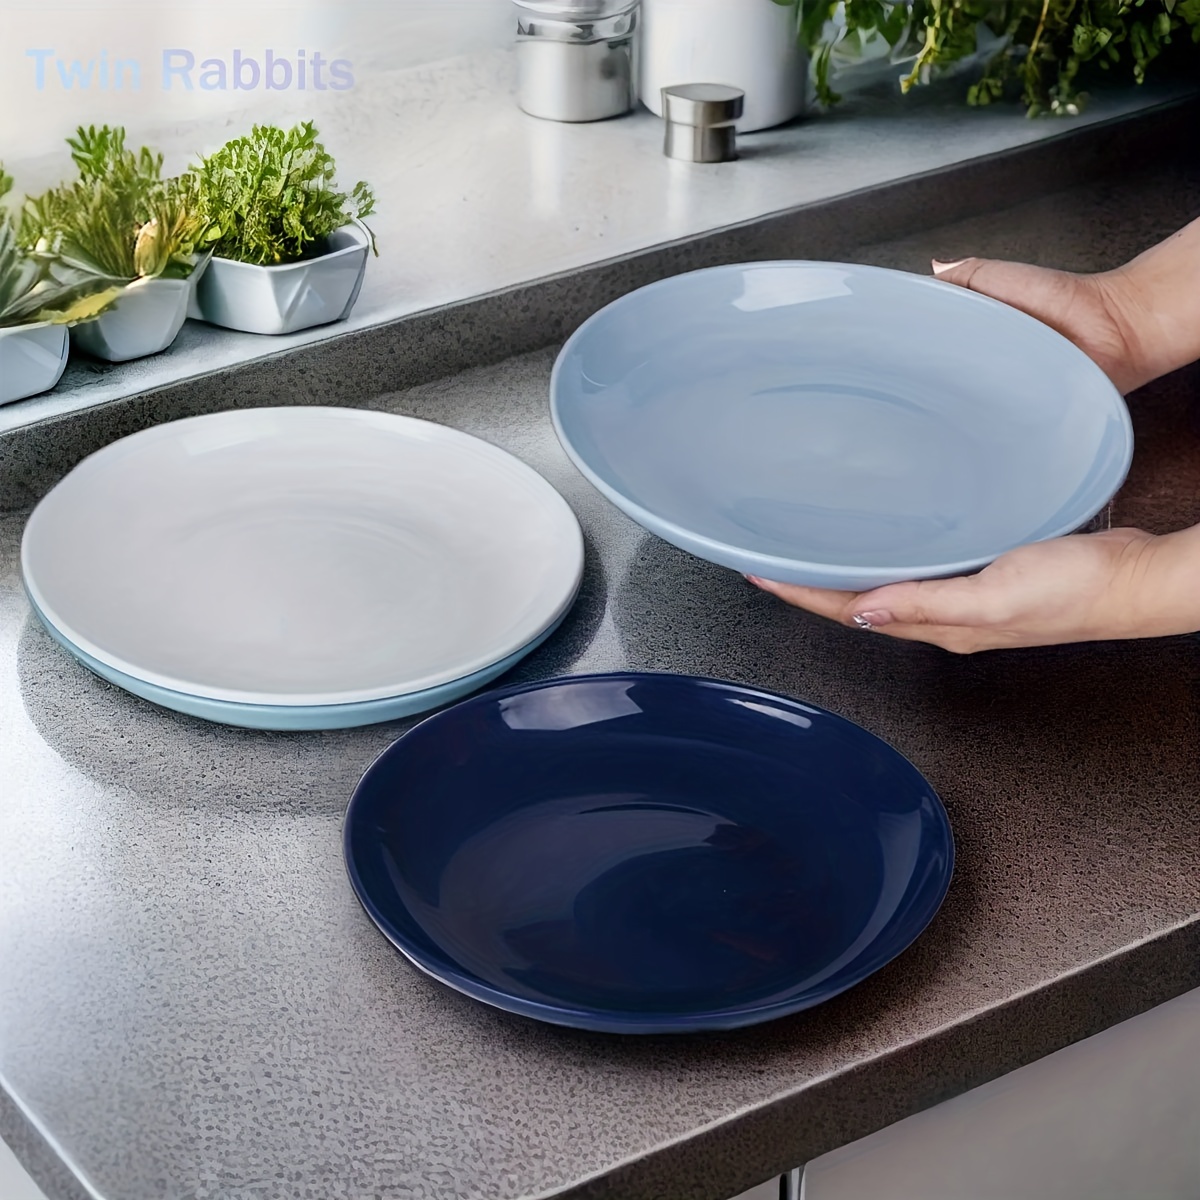 Tupperware Microwave Safe Luncheon Dinner Plates 4 pc Set 9.5 Country Blue  New